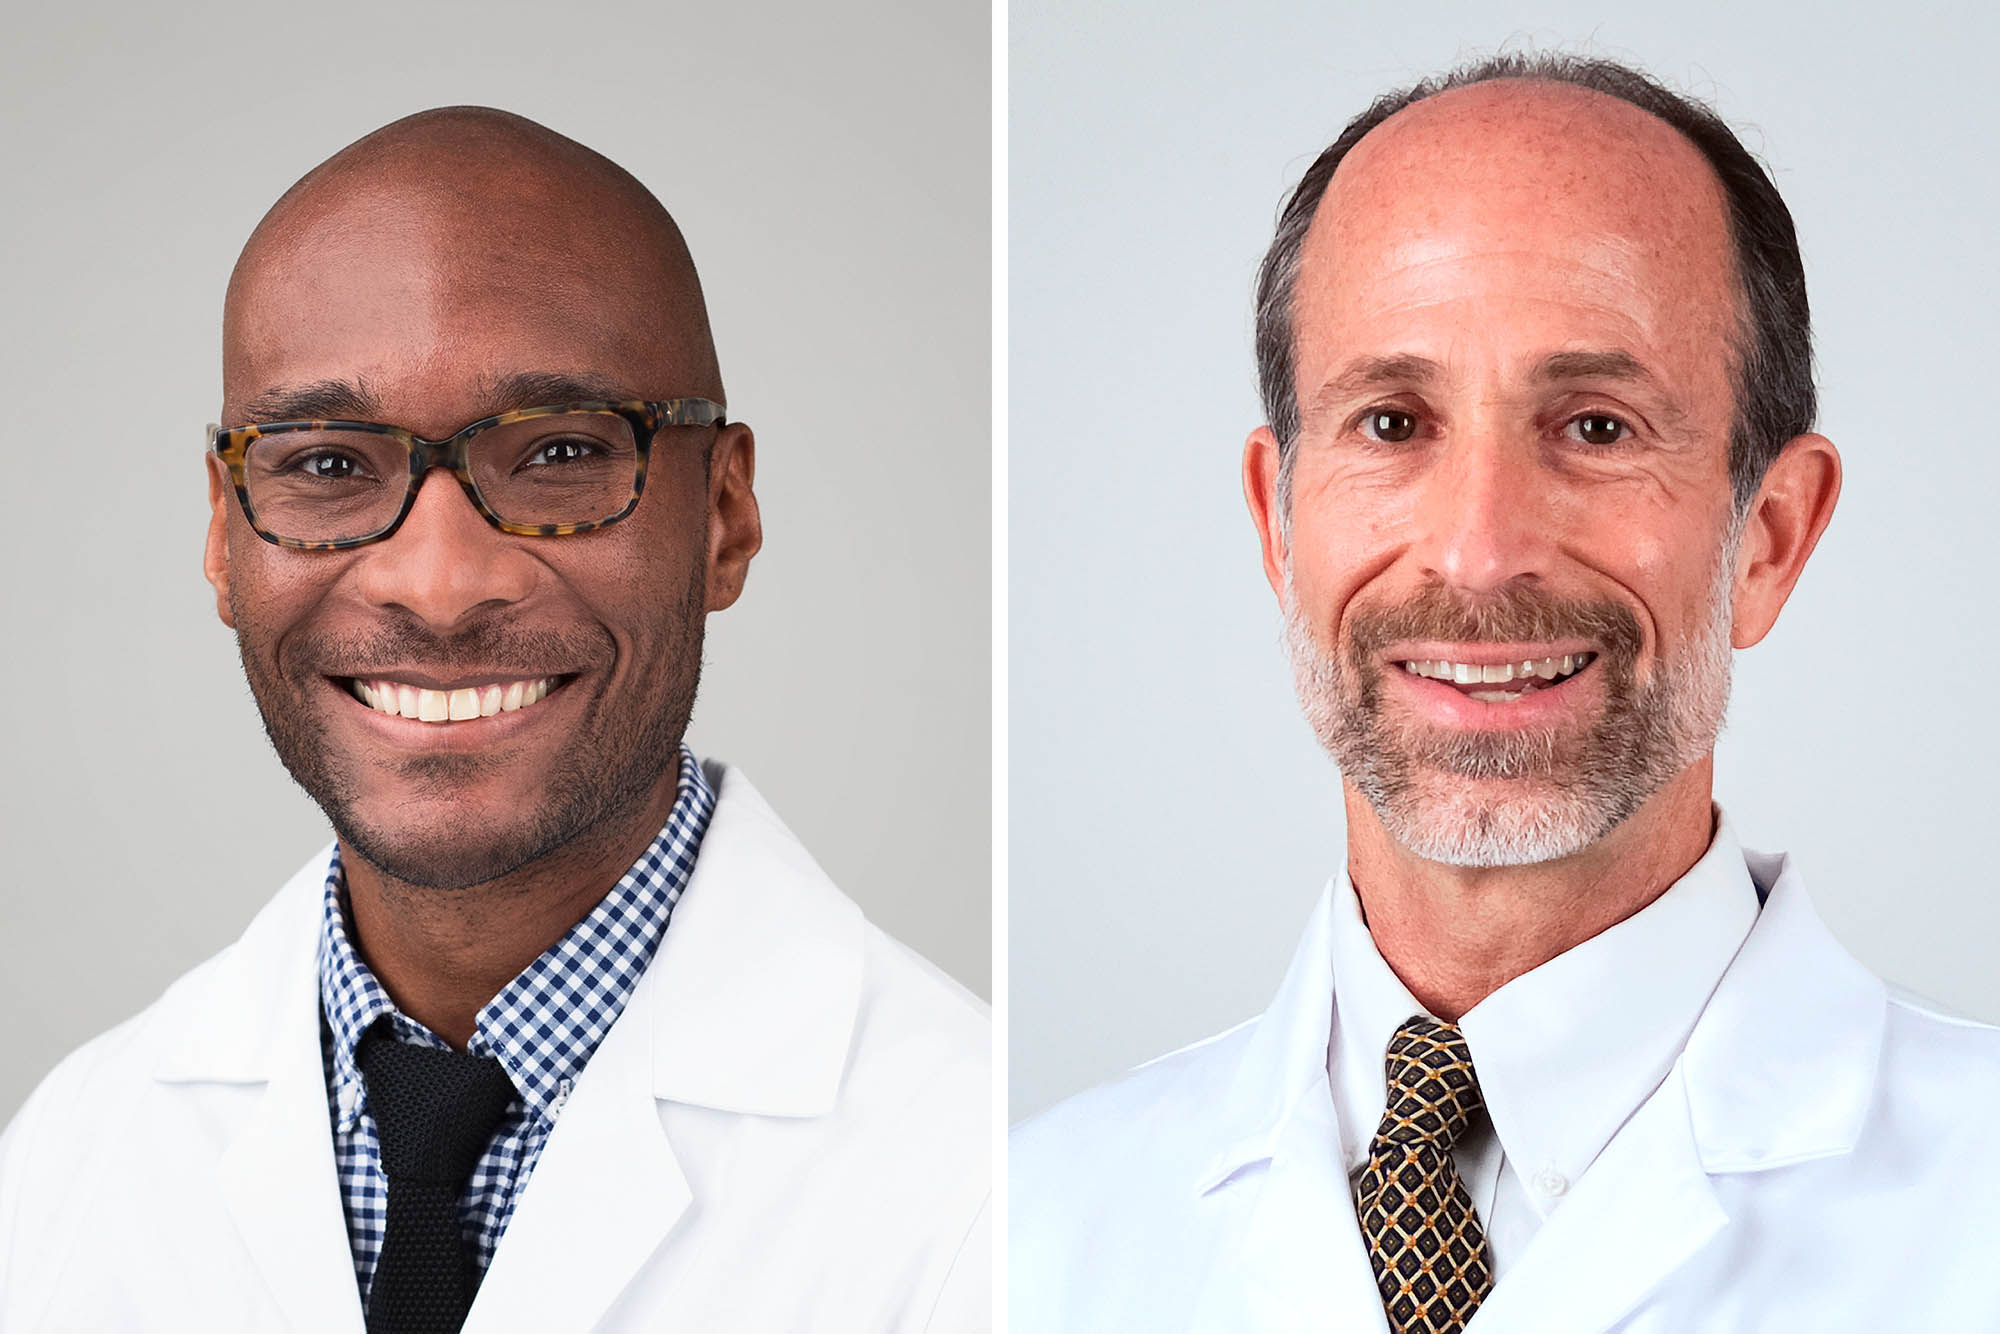 Headshot: Dr. Taison Bell, left, and Dr. Andrew Wolf right